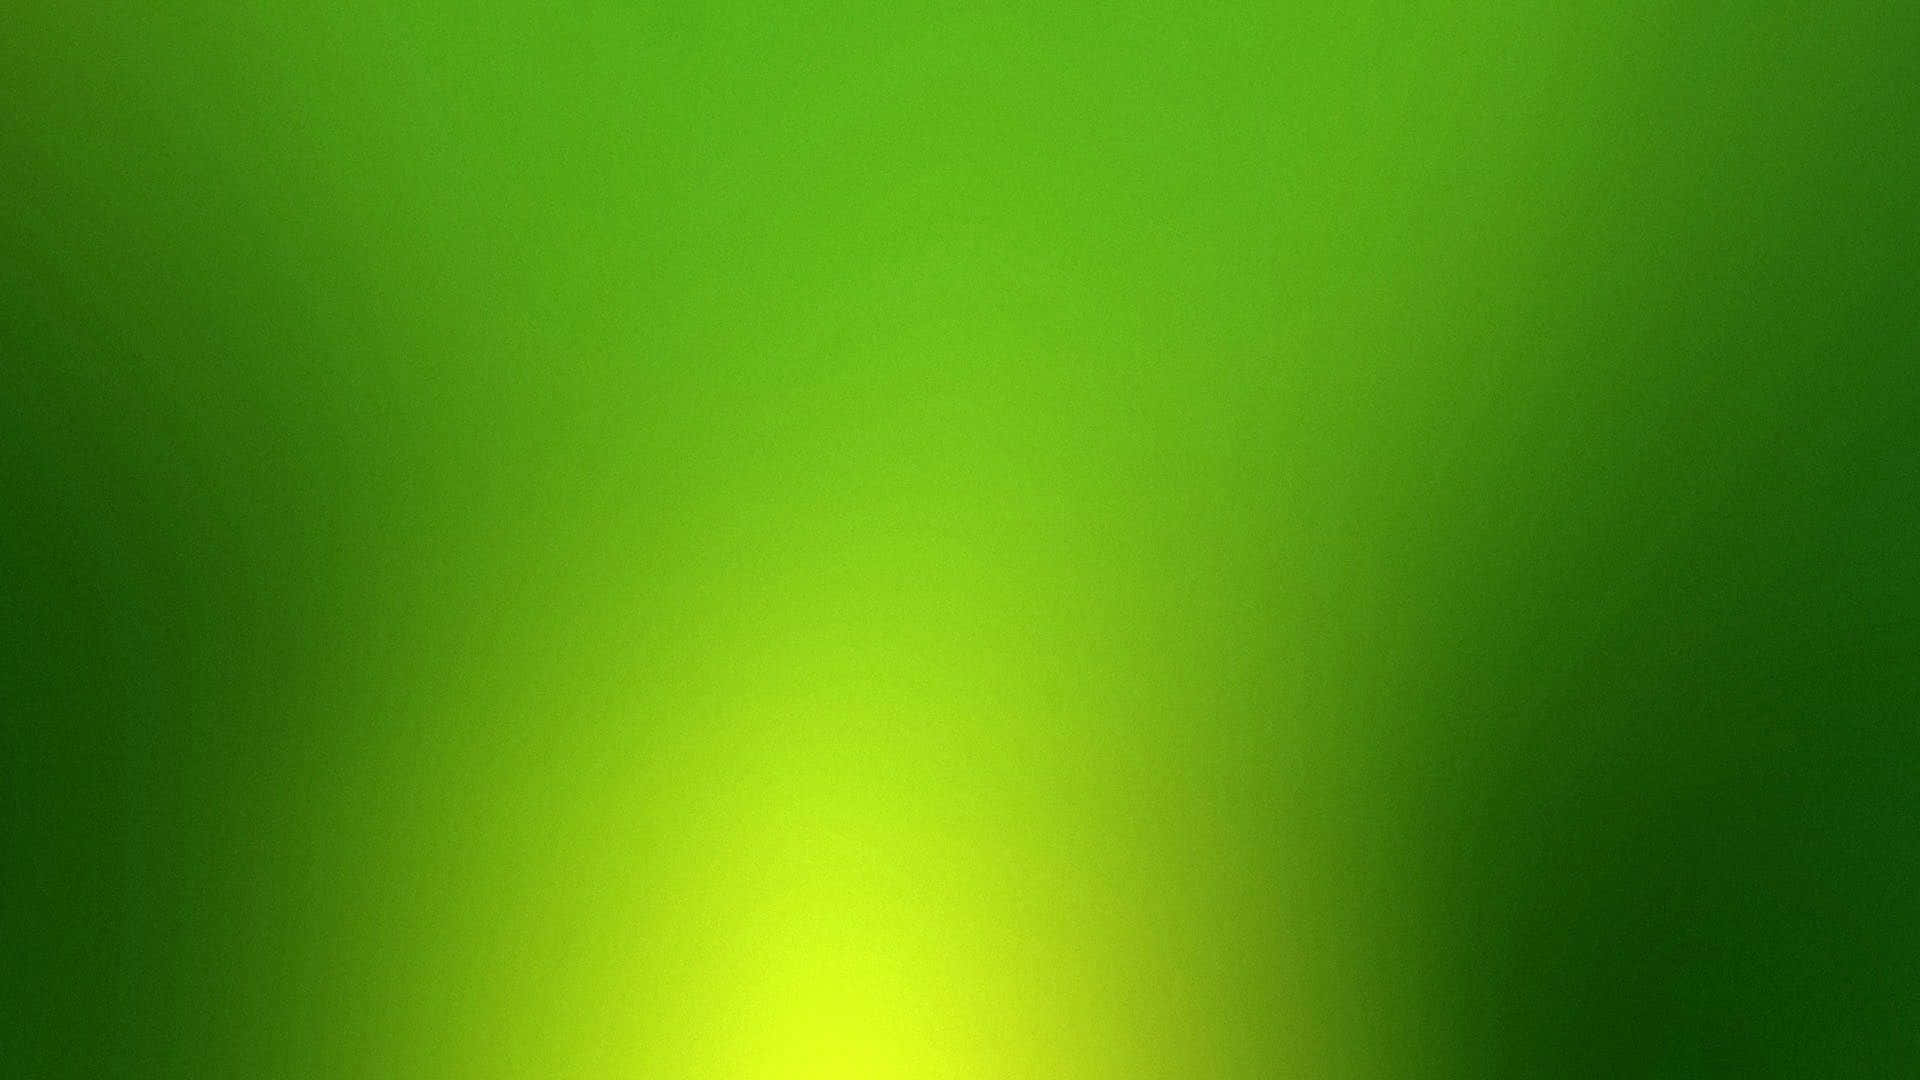 A vibrant solid green background